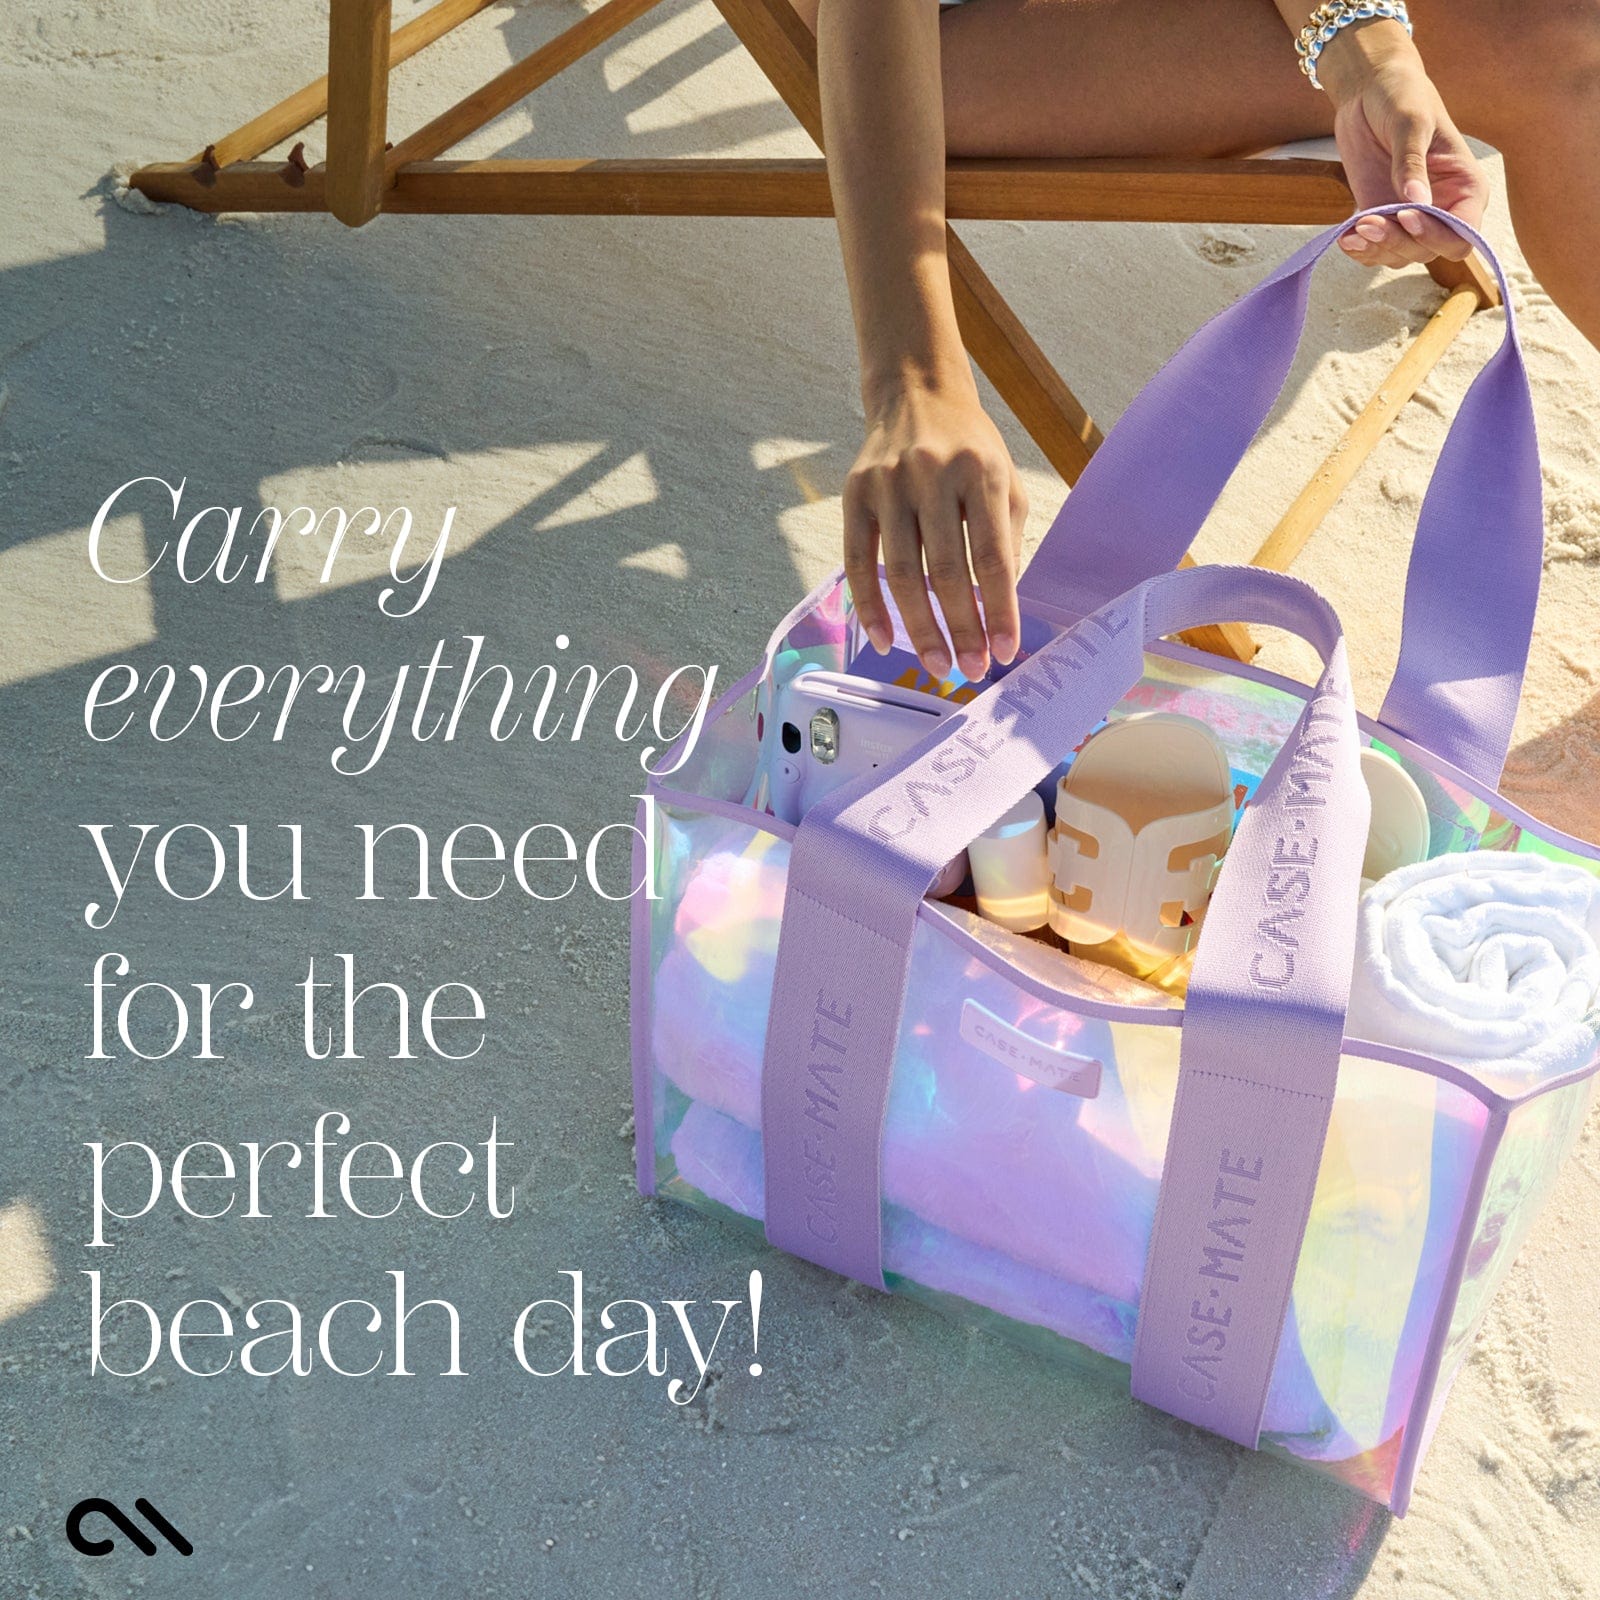 CARRY EVERYTHING YOU NEED FOR THE PERFECT BEACH DAY.